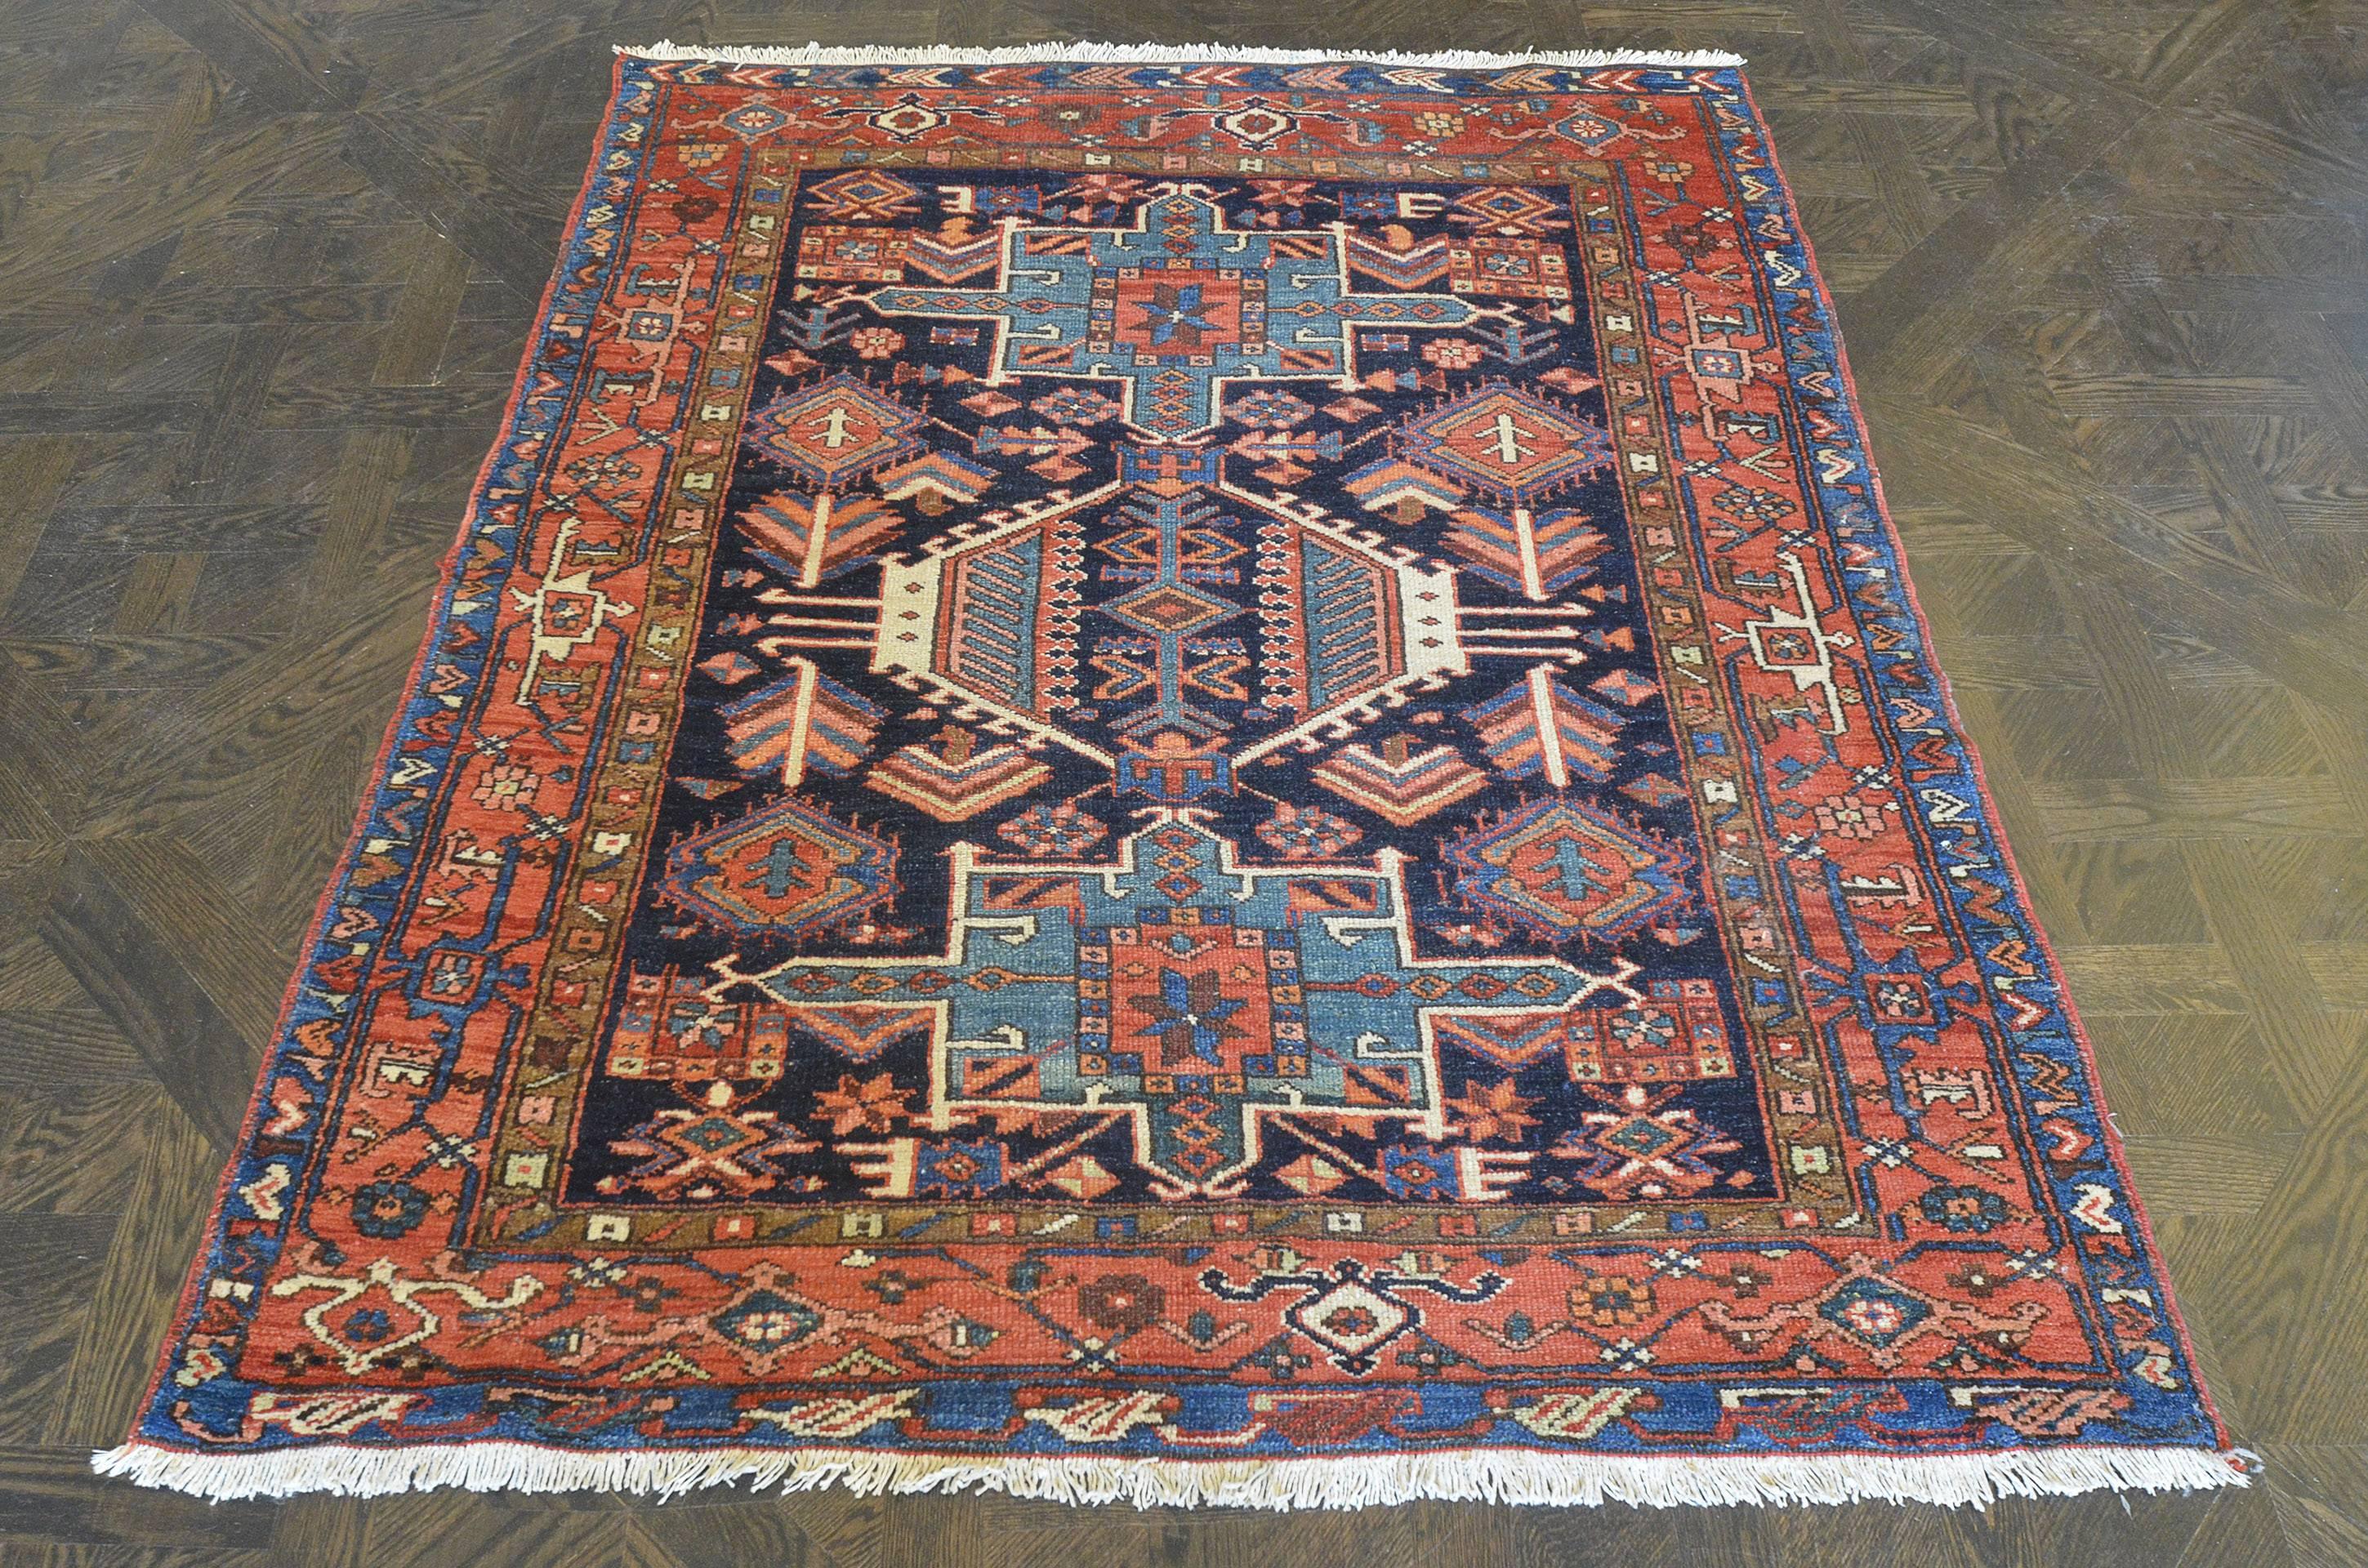 This traditional handwoven Persian Serapi rug has a deep indigo field of sparse tribal motif enclosing complementary geometric medallions, in a terracotta linked turtle palmette border, between stylized vine stripes.